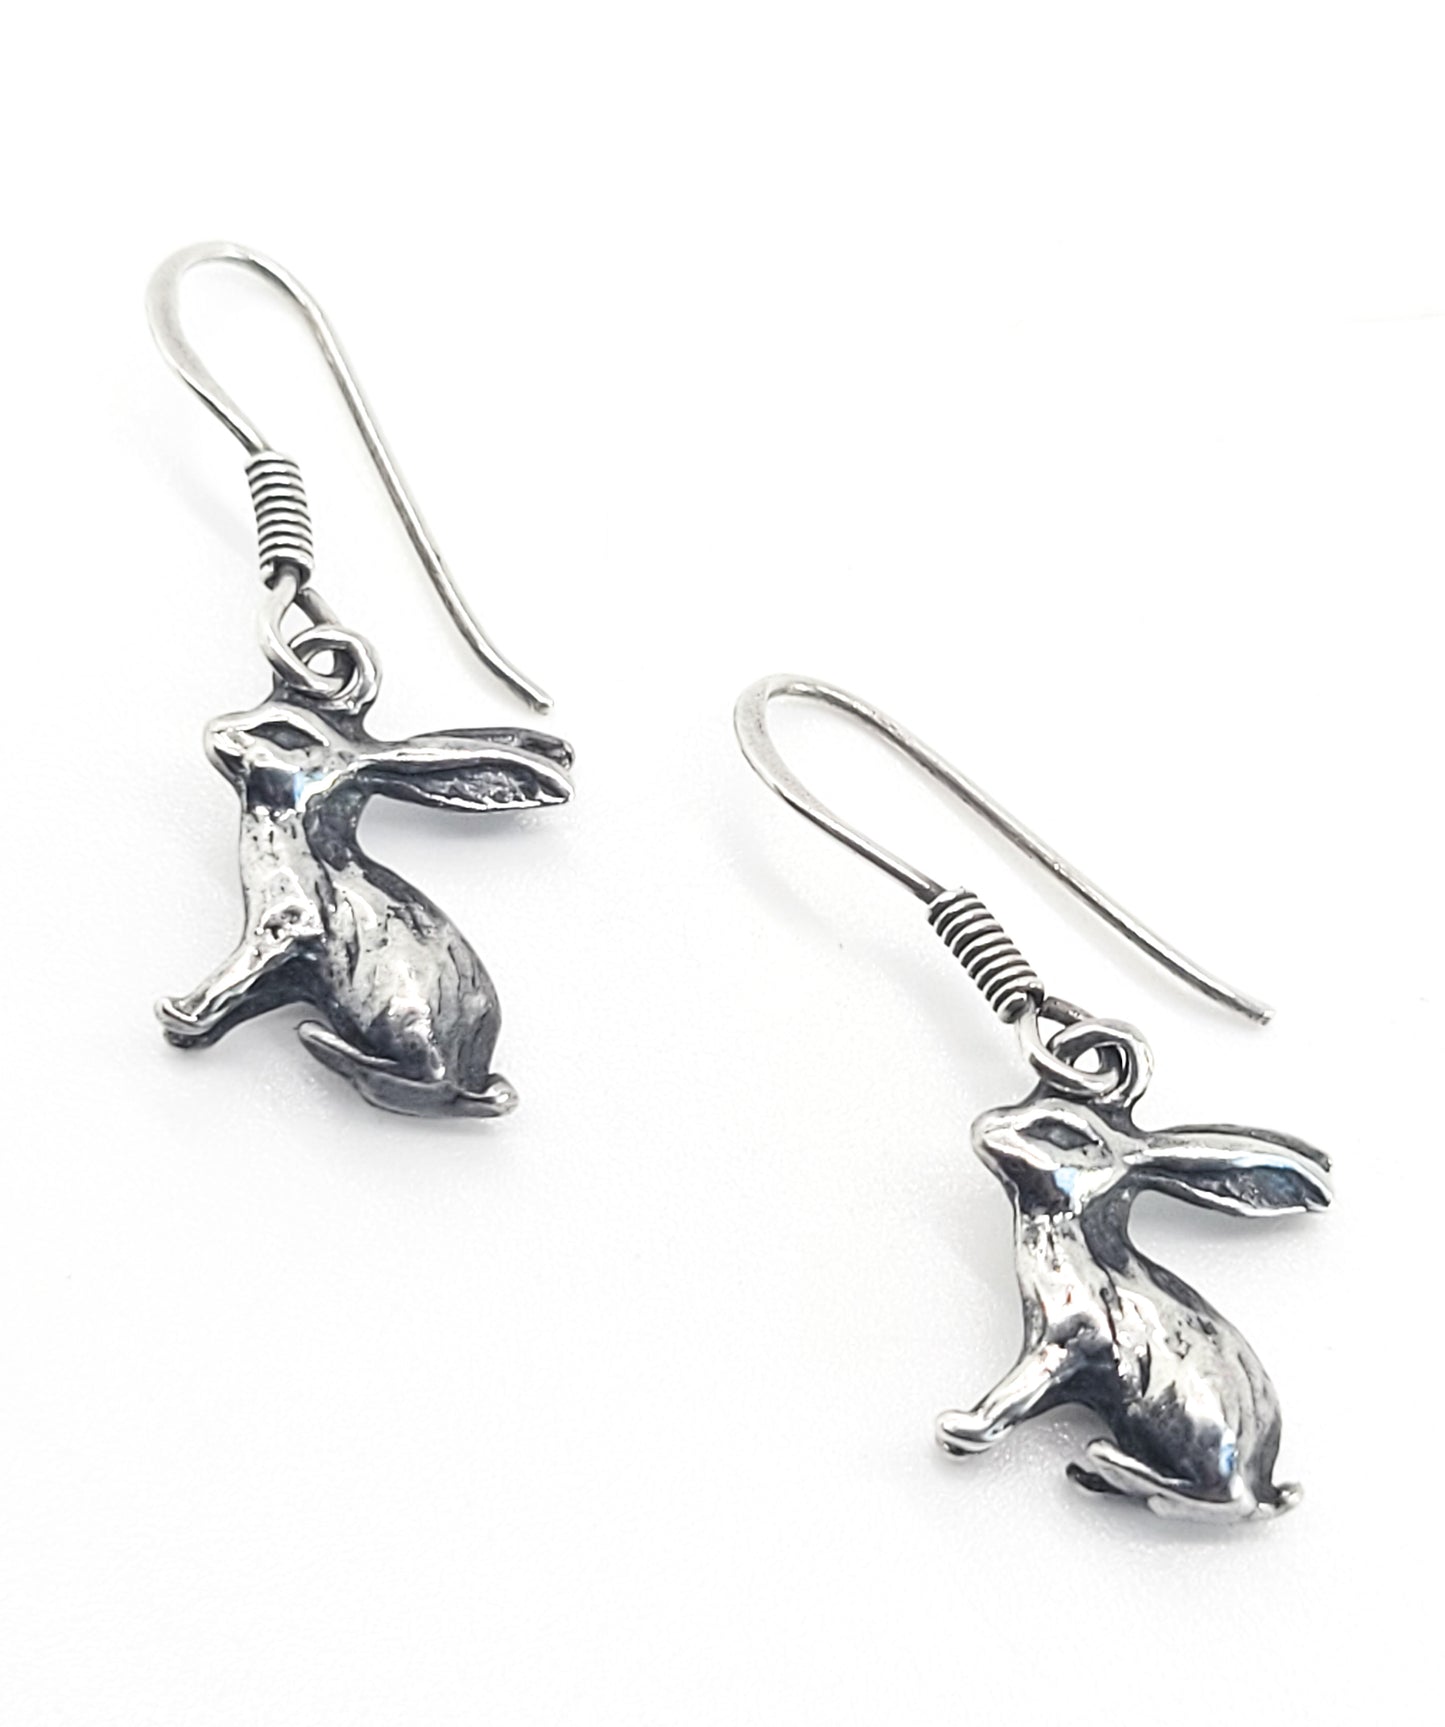 Rabbit sitting bunny detailed figural animal sterling silver drop earrings Hare